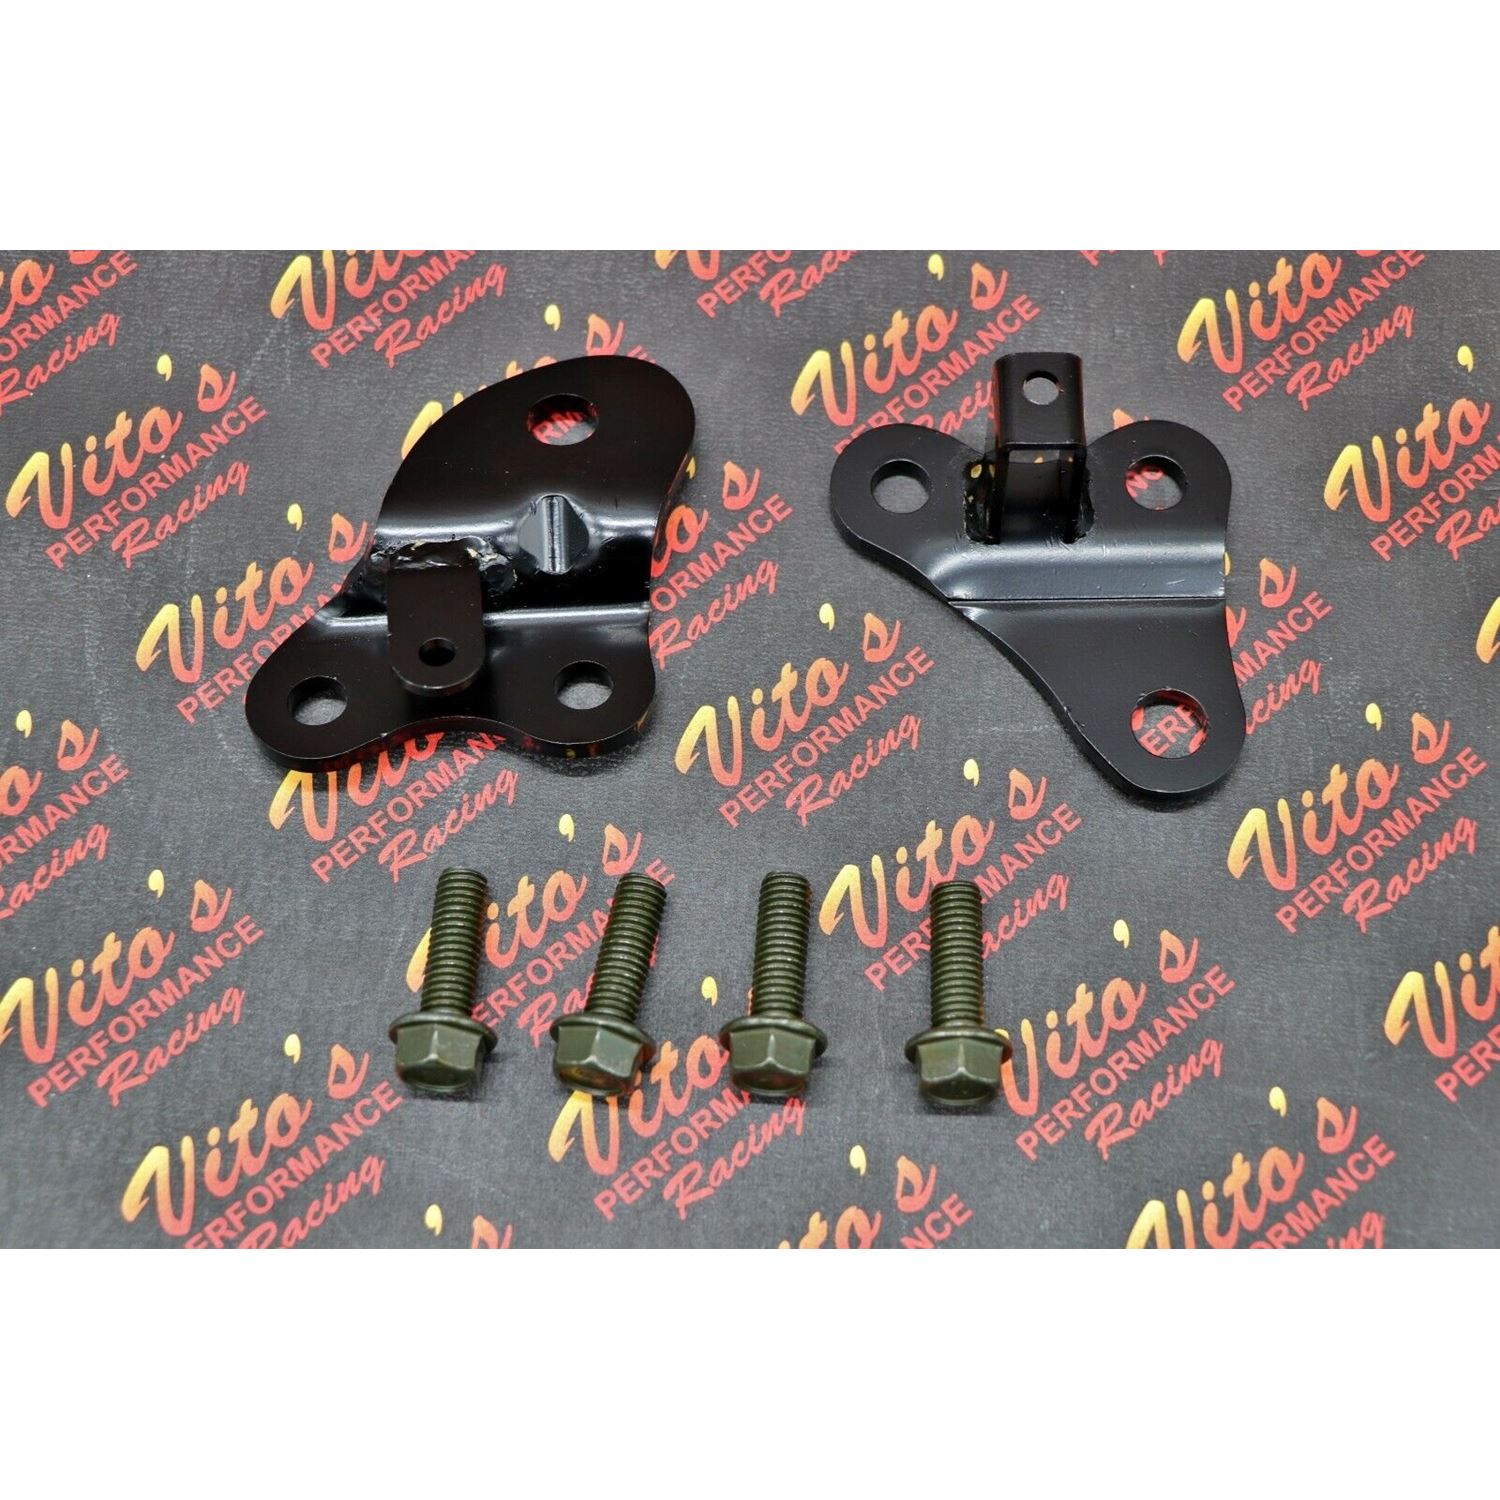 2 x NEW MOTOR MOUNTS upper front left +right + eng